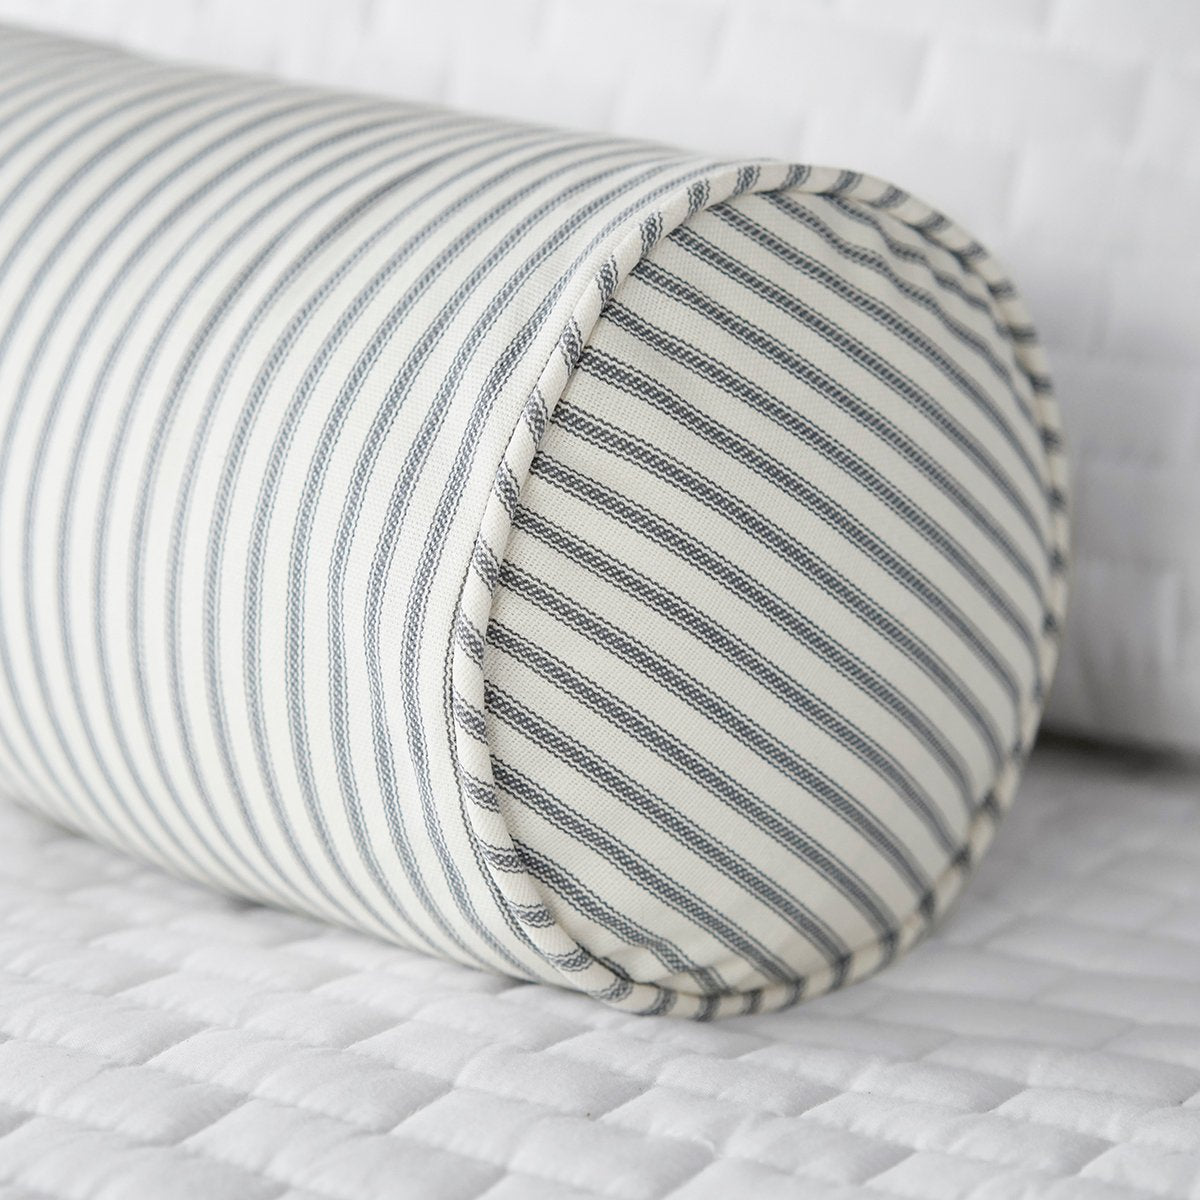 Ticking Stripe Bolster Pillow with Insert 6"x12" - Black, Navy, Red, Grey, Brown